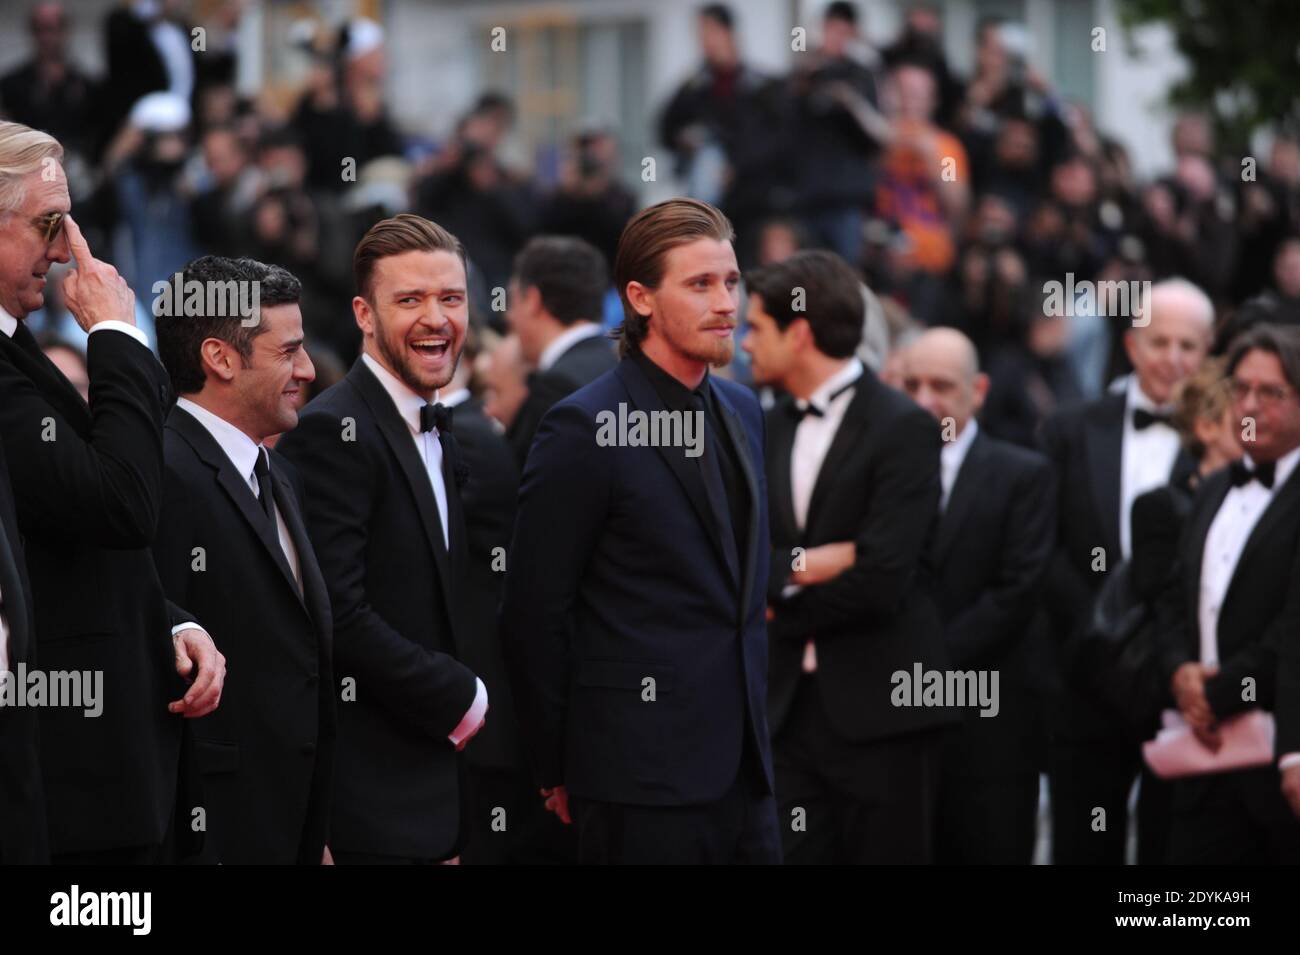 Oscar Isaac, Justin Timberlake, Garett Hedlund, Joel Coen, Ethan Coen, John Goodman arriving for the 'Inside Llewyn Davis' screening held at the Palais Des Festivals as part of the 66th Cannes film festival, in Cannes, southern France, on May 19, 2013. Photo by Aurore Marechal/ABACAPRESS.COM Stock Photo